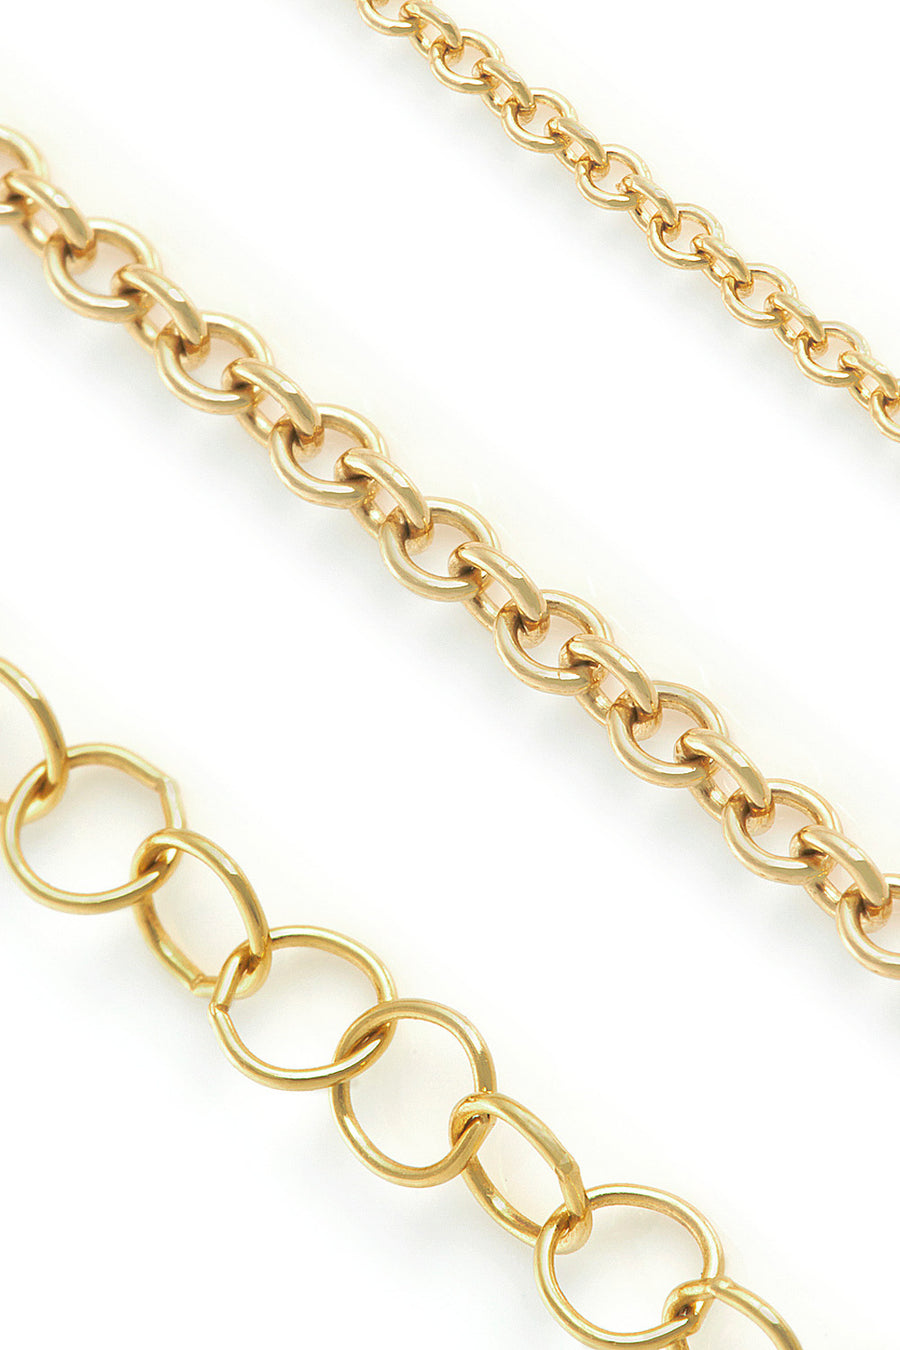 2.0mm Cable Chain Necklace in 14k Yellow Gold - 20"